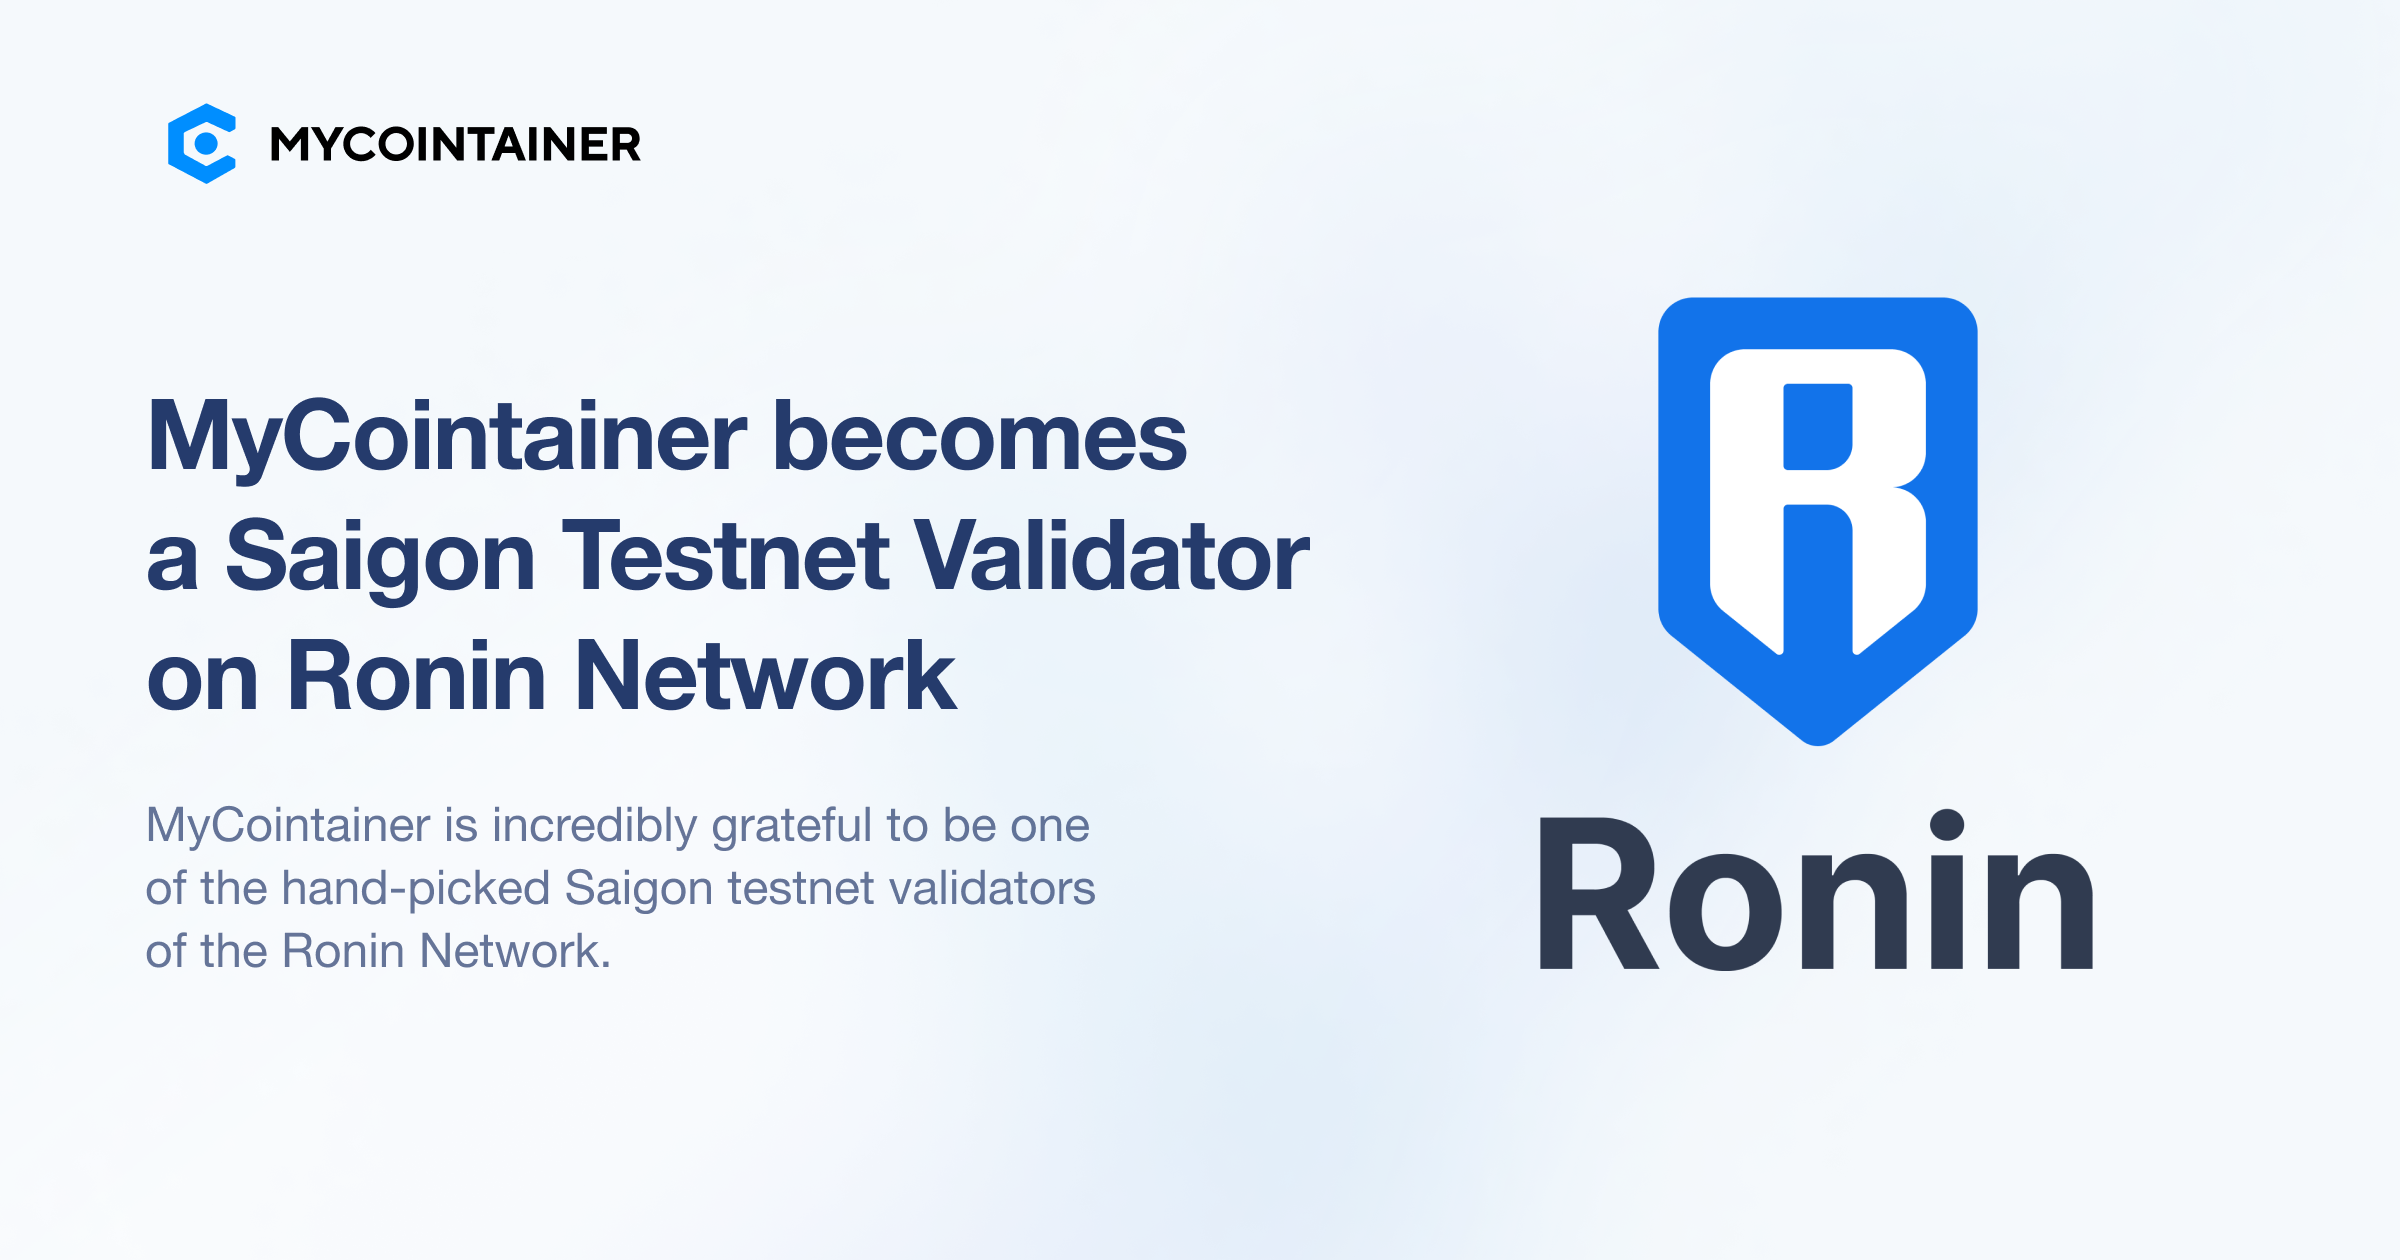 MyCointainer becomes a Saigon Testnet Validator on Ronin Network